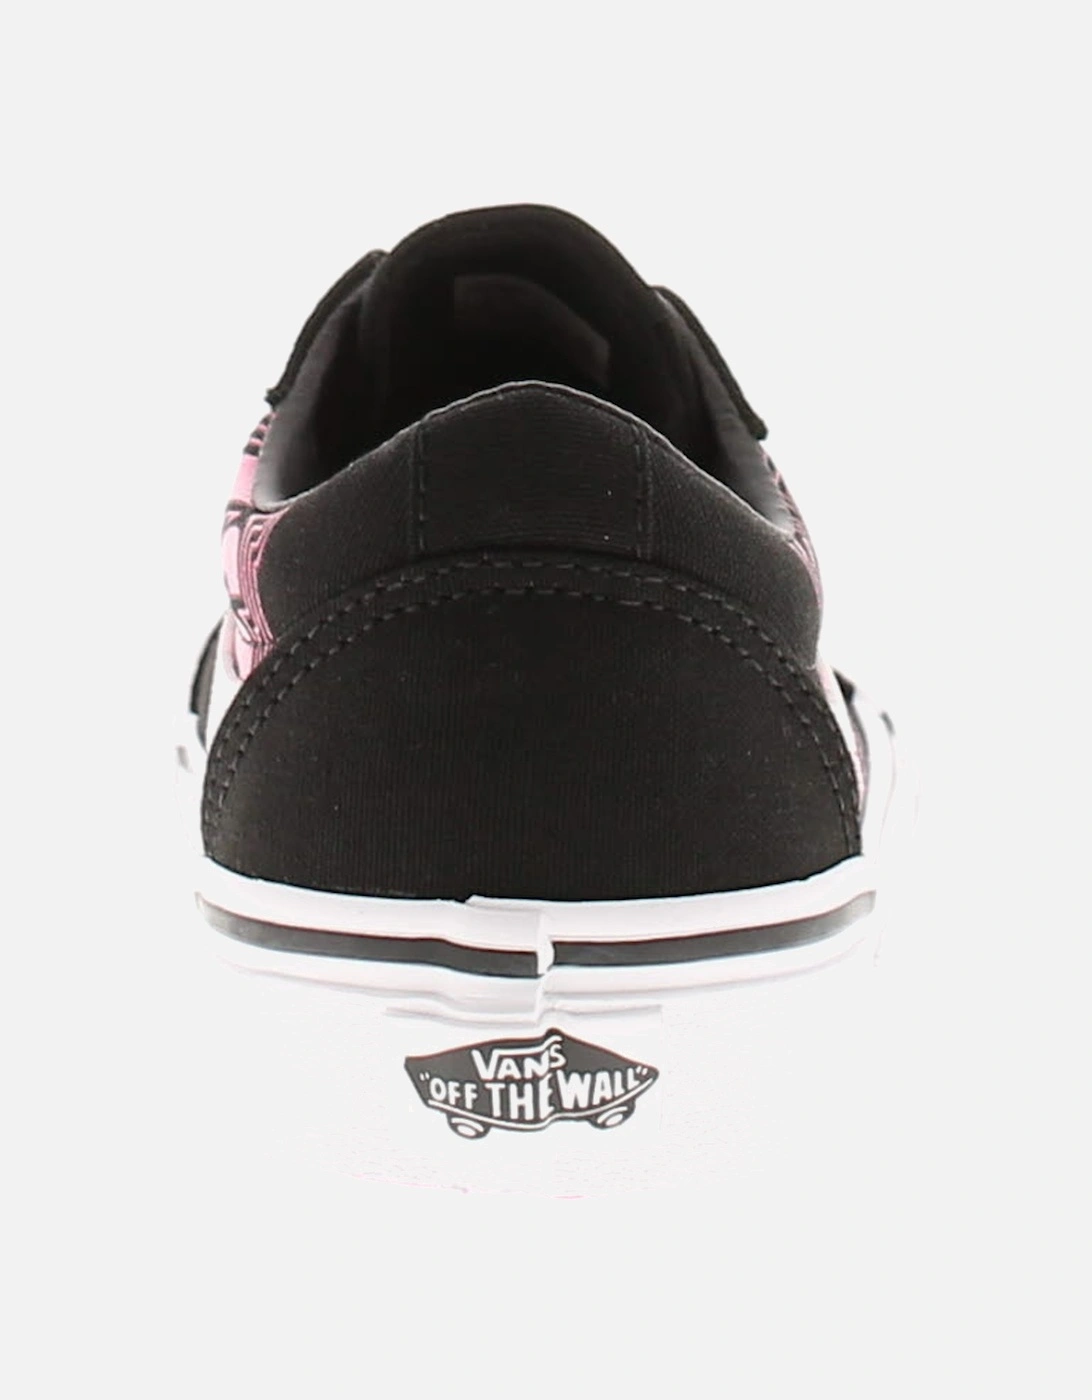 Childrens Trainers My Ward Glow Lace Up black UK Size